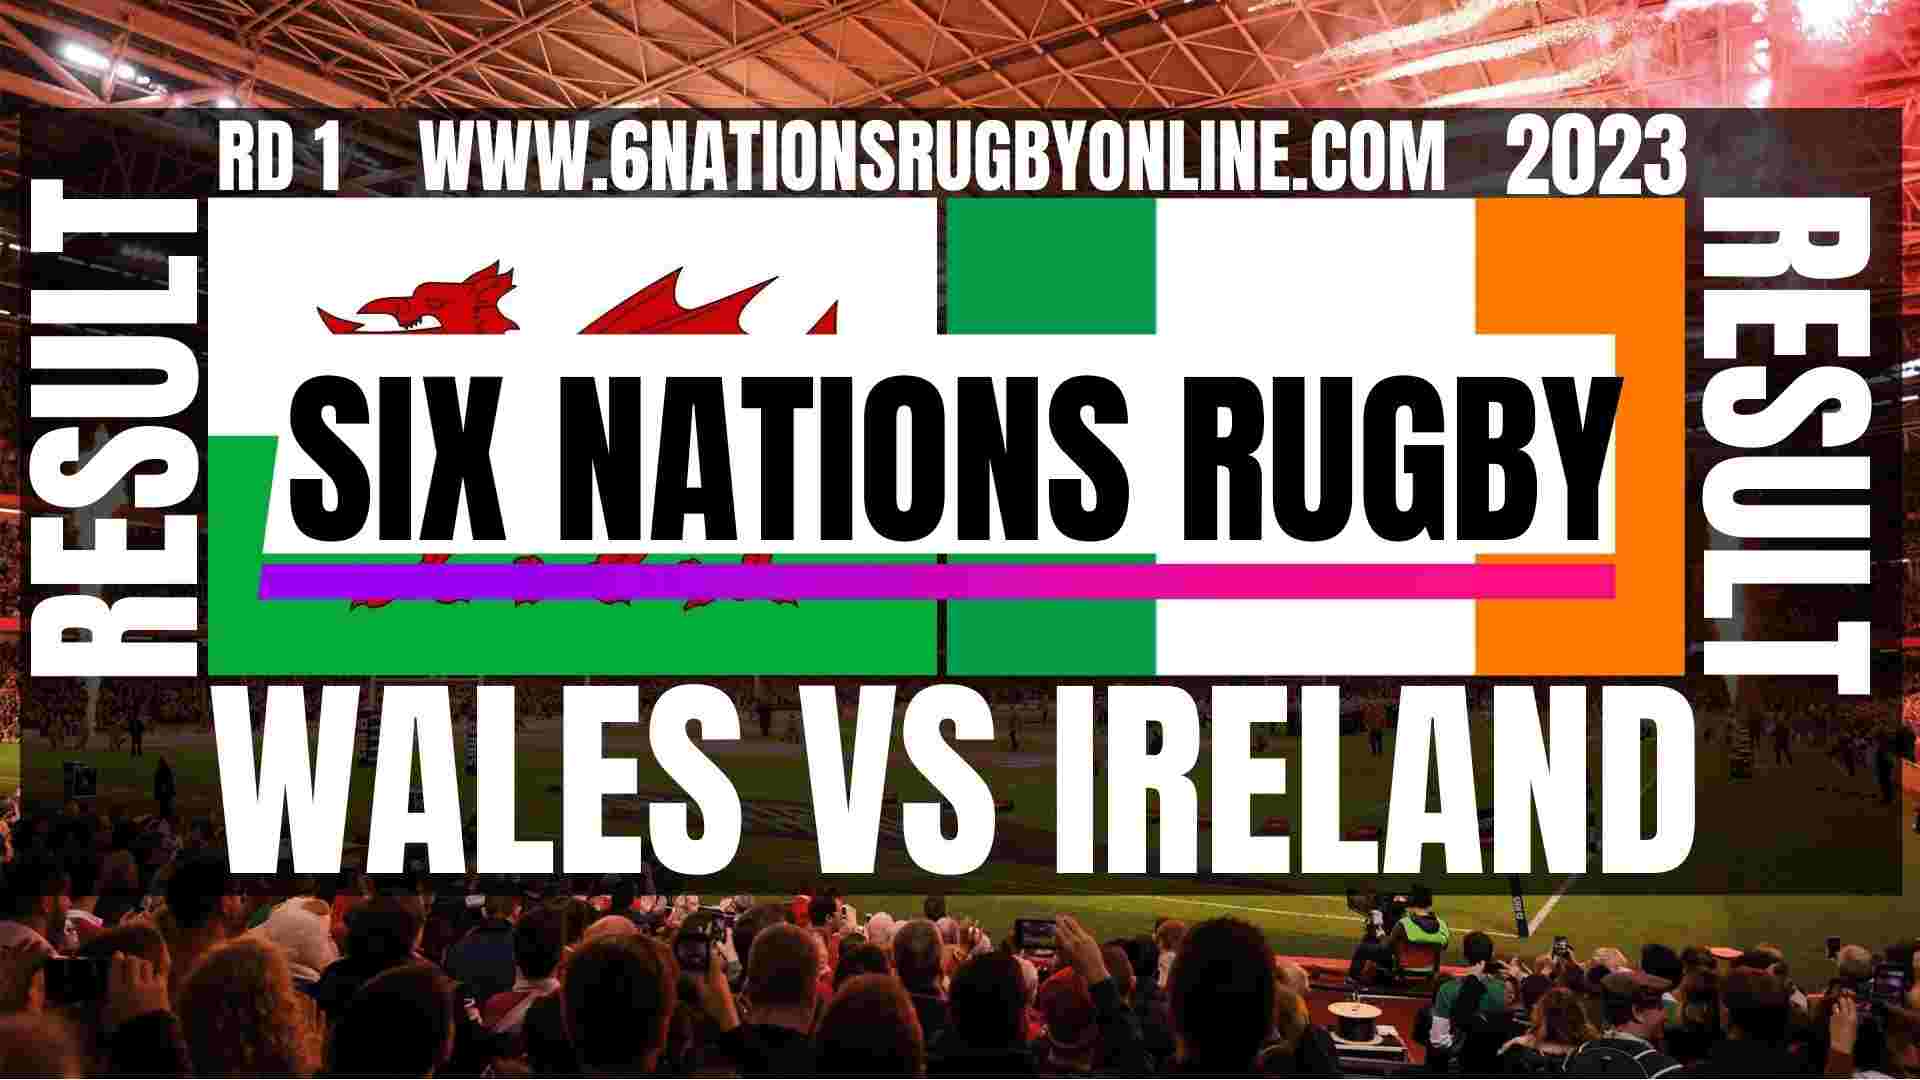 Wales vs Ireland RD 1 Result 2023 | Six Nations Rugby